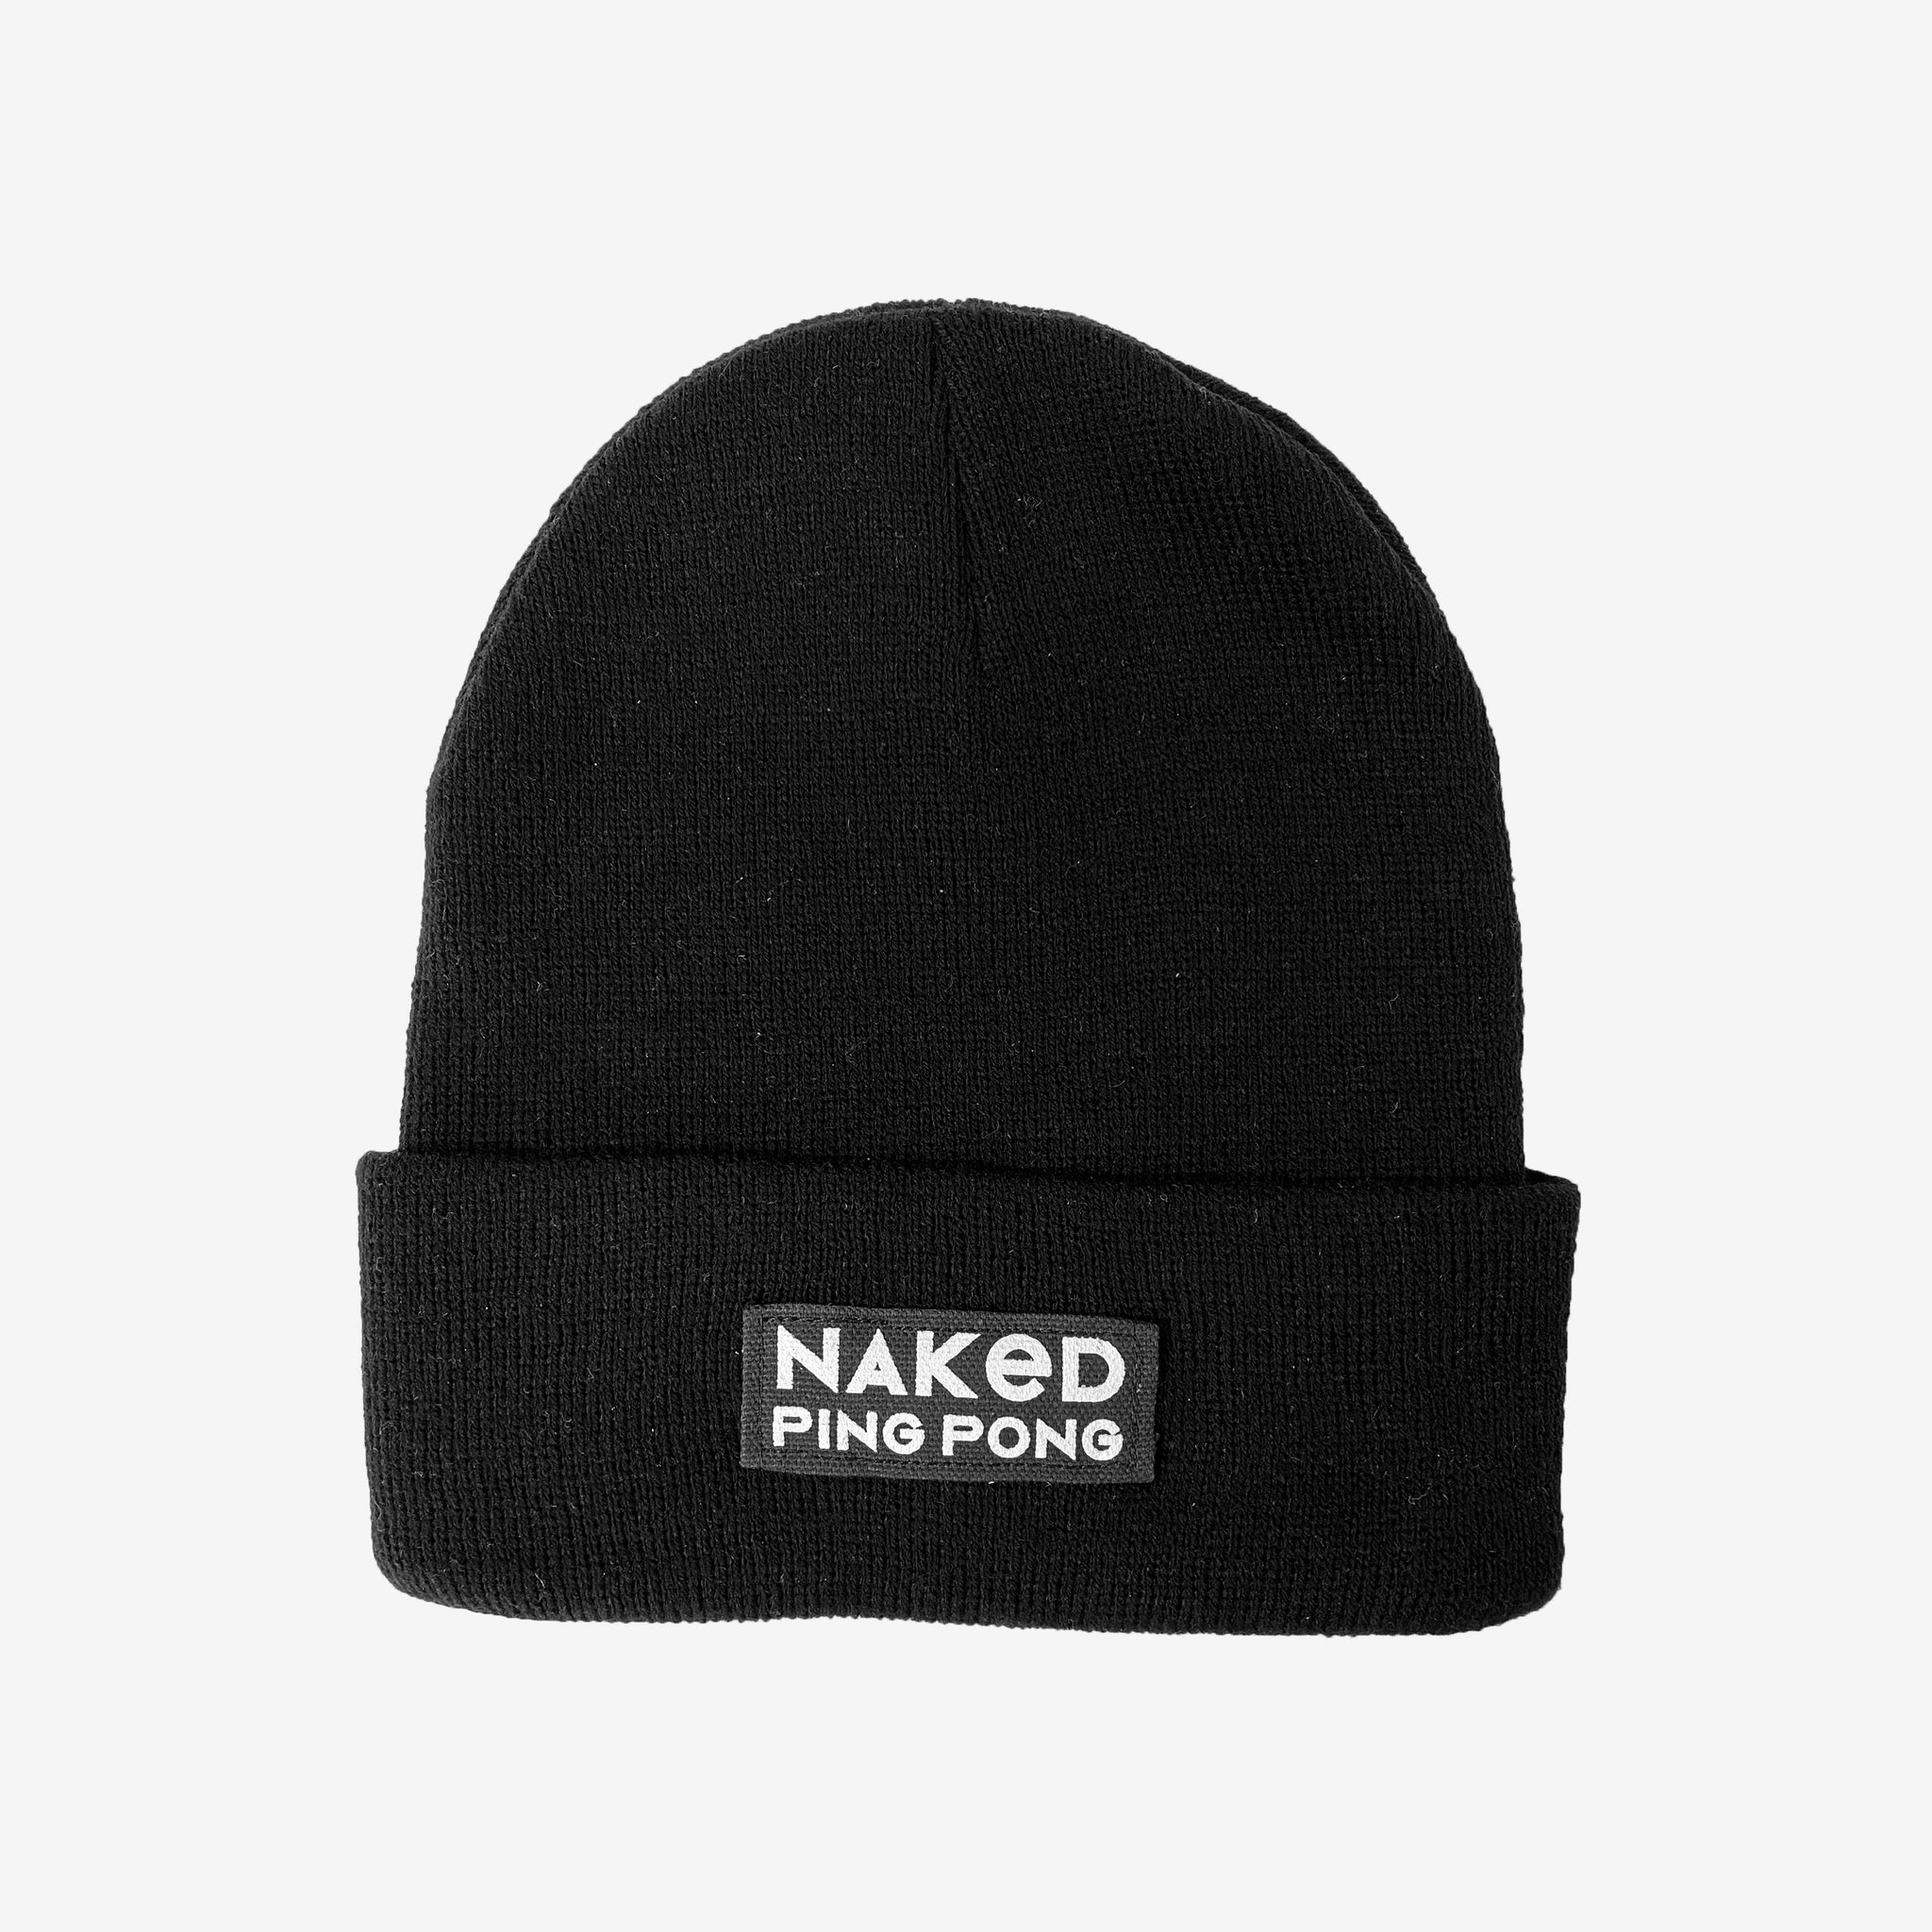 Naked Ping Pong Grey Beanie - SPIN.